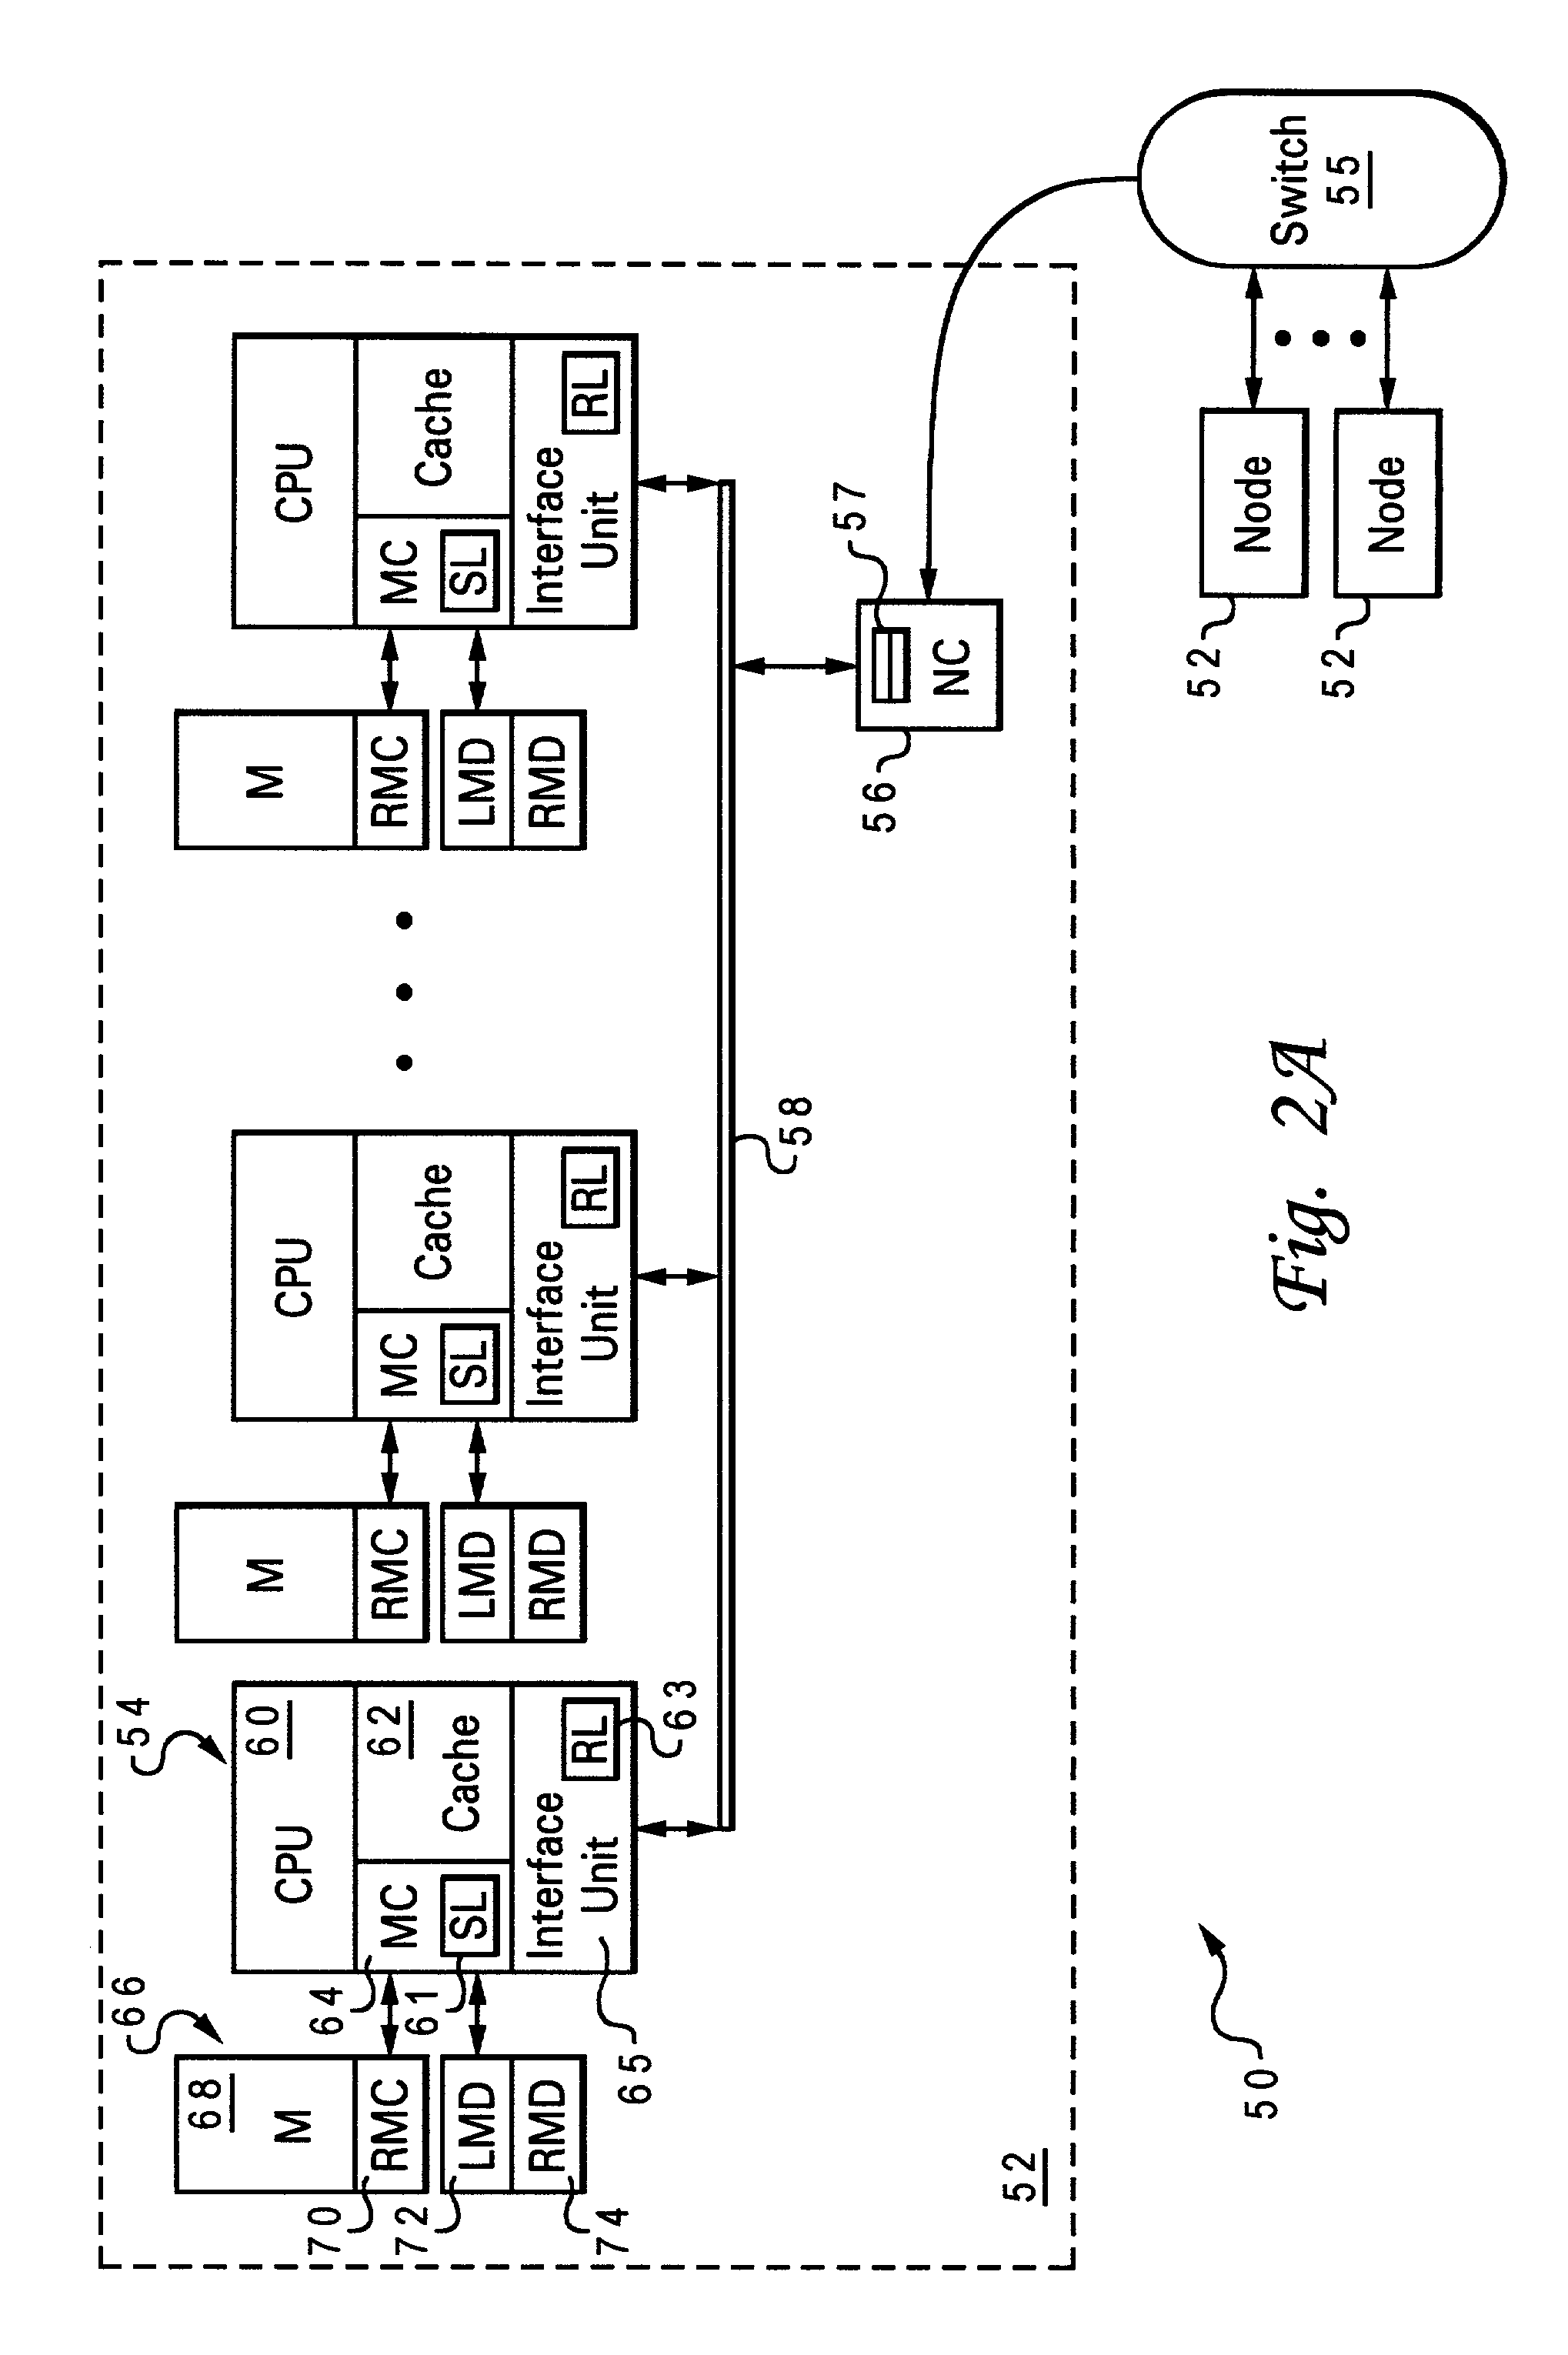 Non-uniform memory access (NUMA) data processing system having remote memory cache incorporated within system memory